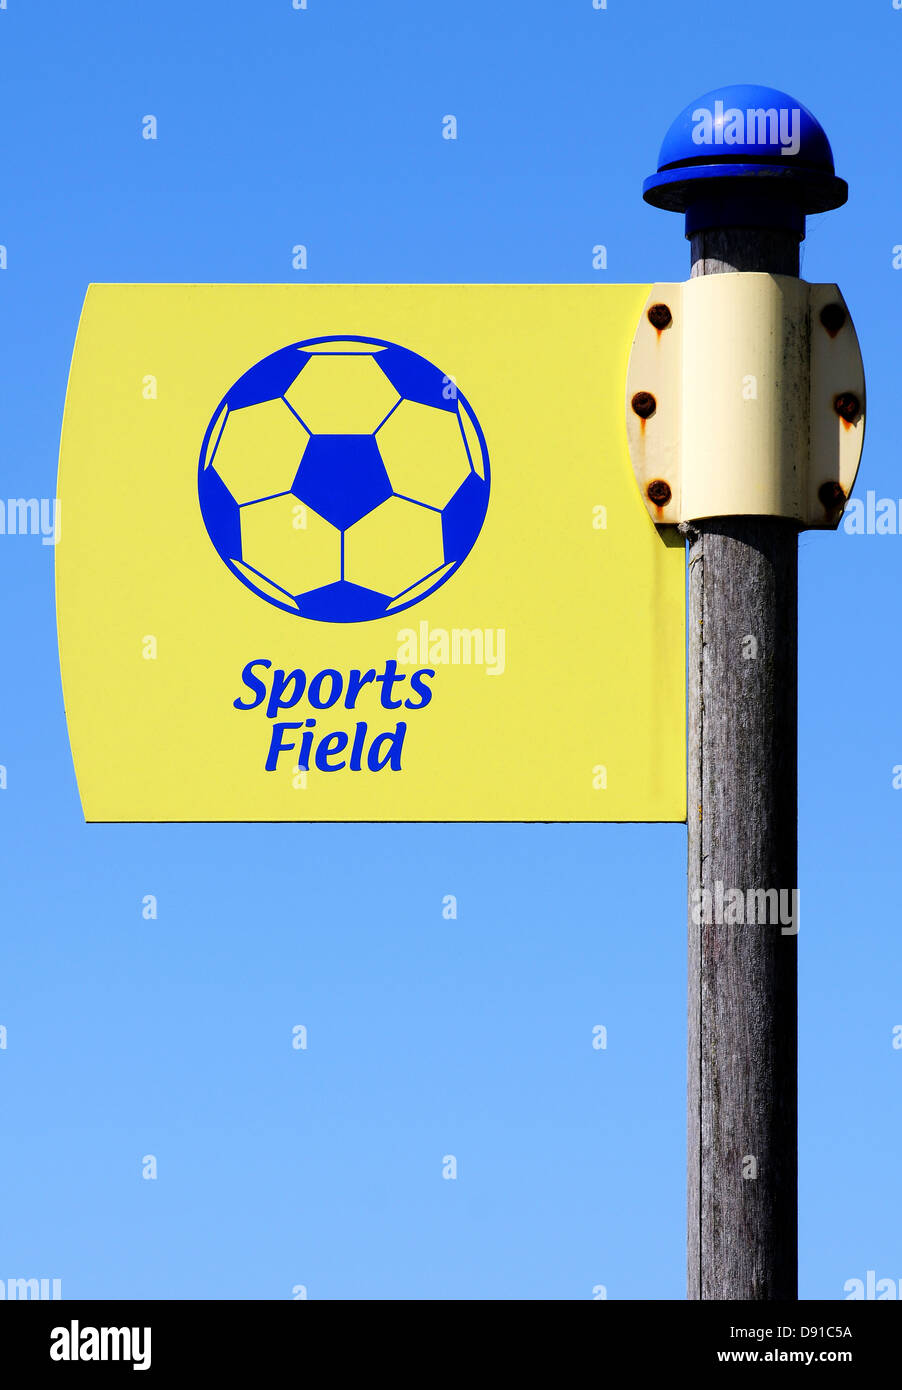 Sports field sign Stock Photo